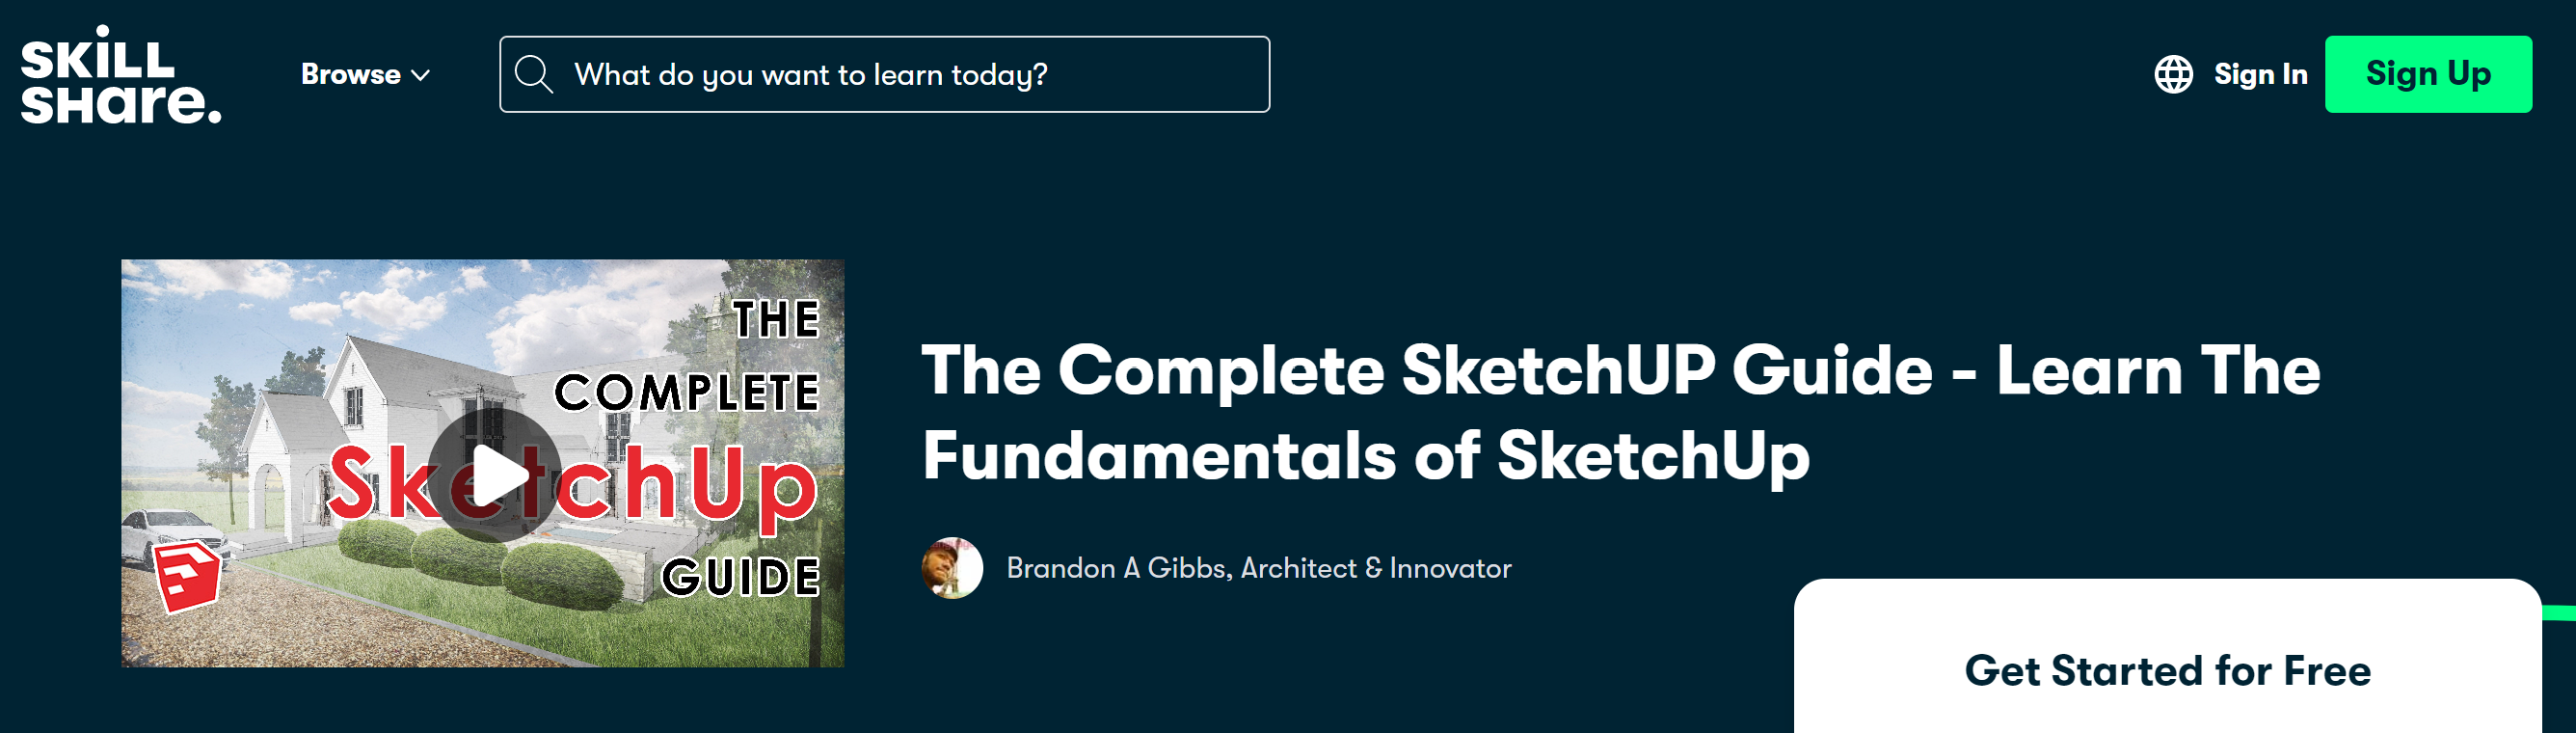 The Complete Sketchup Guide - Learn the Fundamentals for Sketchup